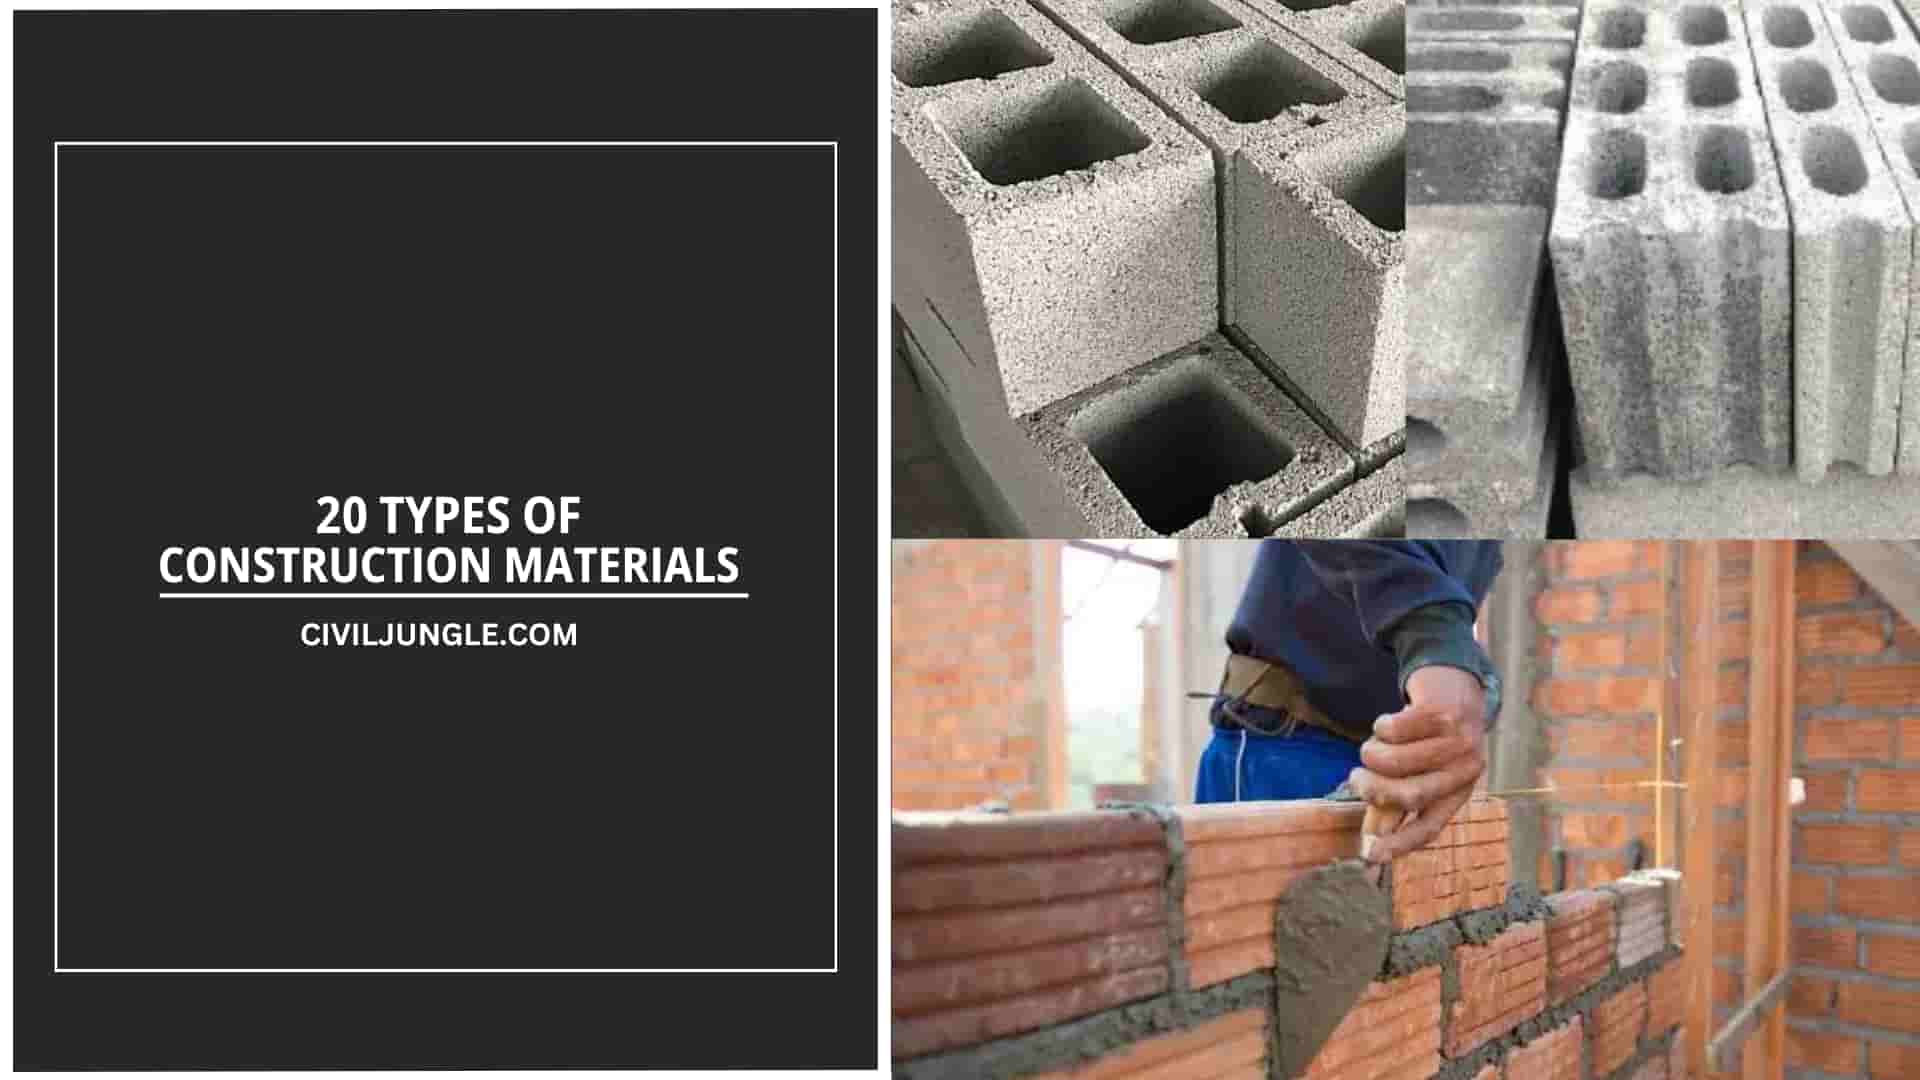 20 TYPES OF CONSTRUCTION MATERIALS 